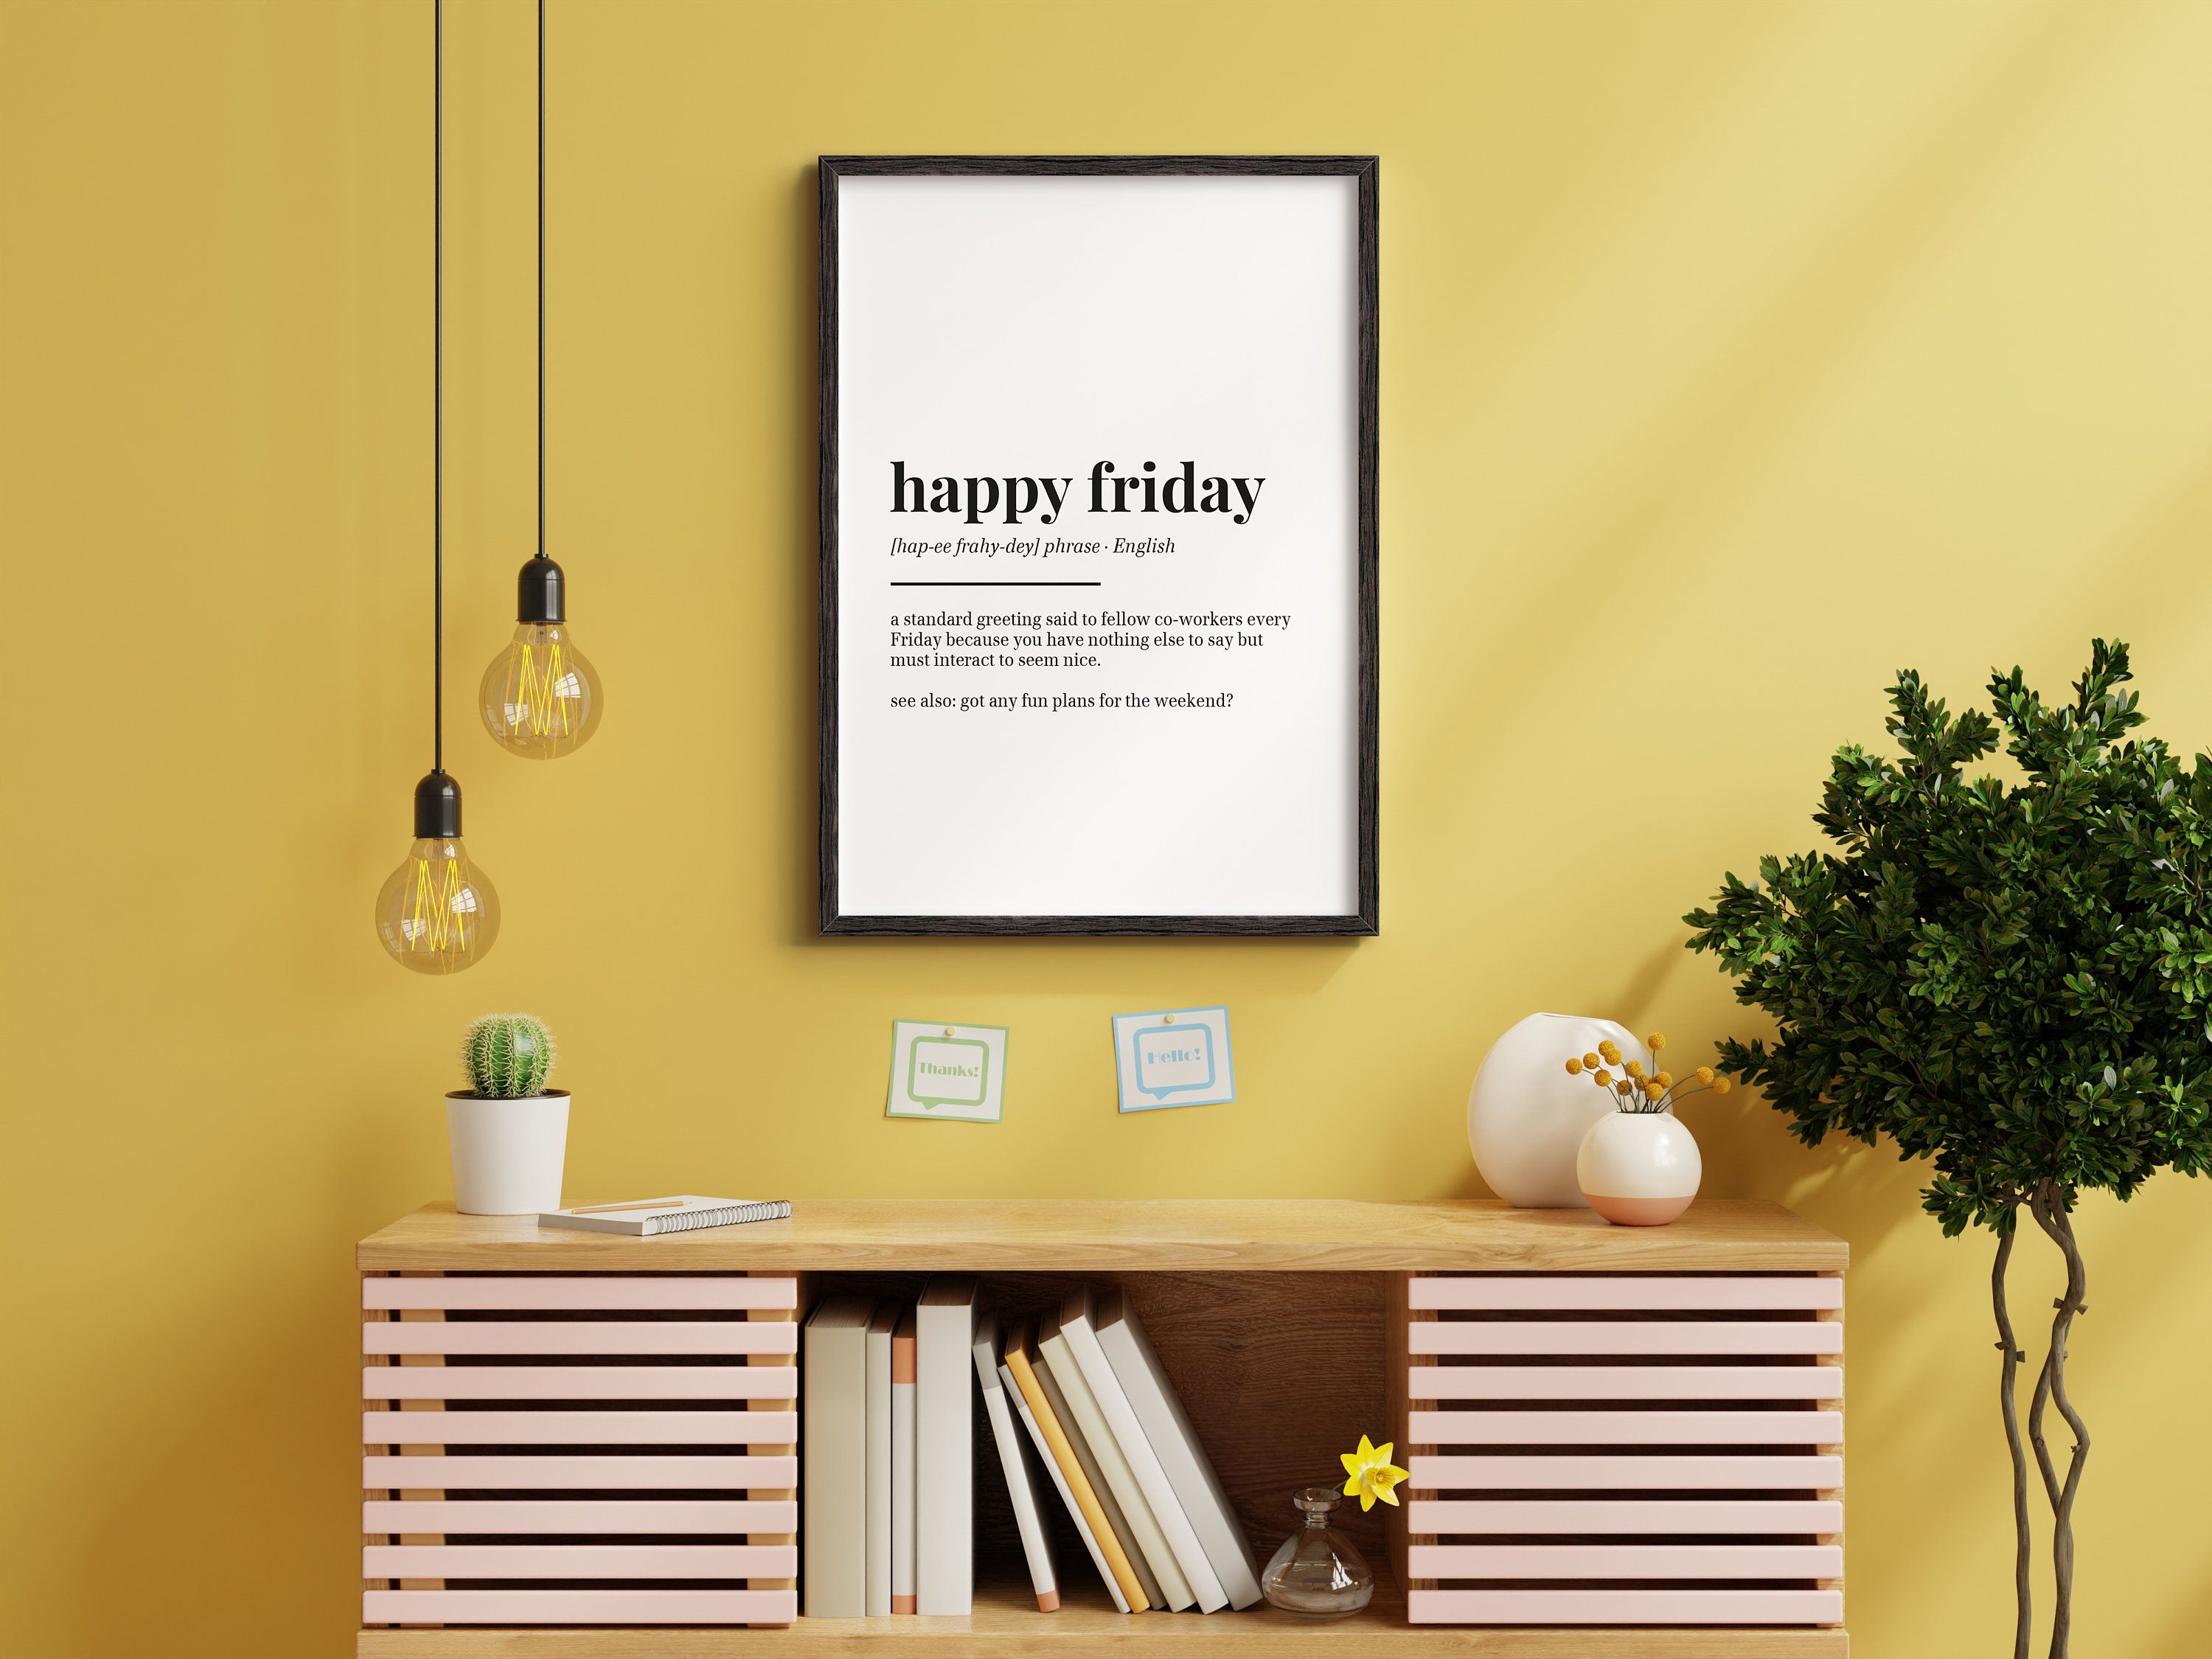 Happy Friday Wall Decor Funny 8x10, A3, 4x6, Office 10x12, A5, 12x14 Poster Art 5x7, - Print Definition A4, Etsy A6, Home